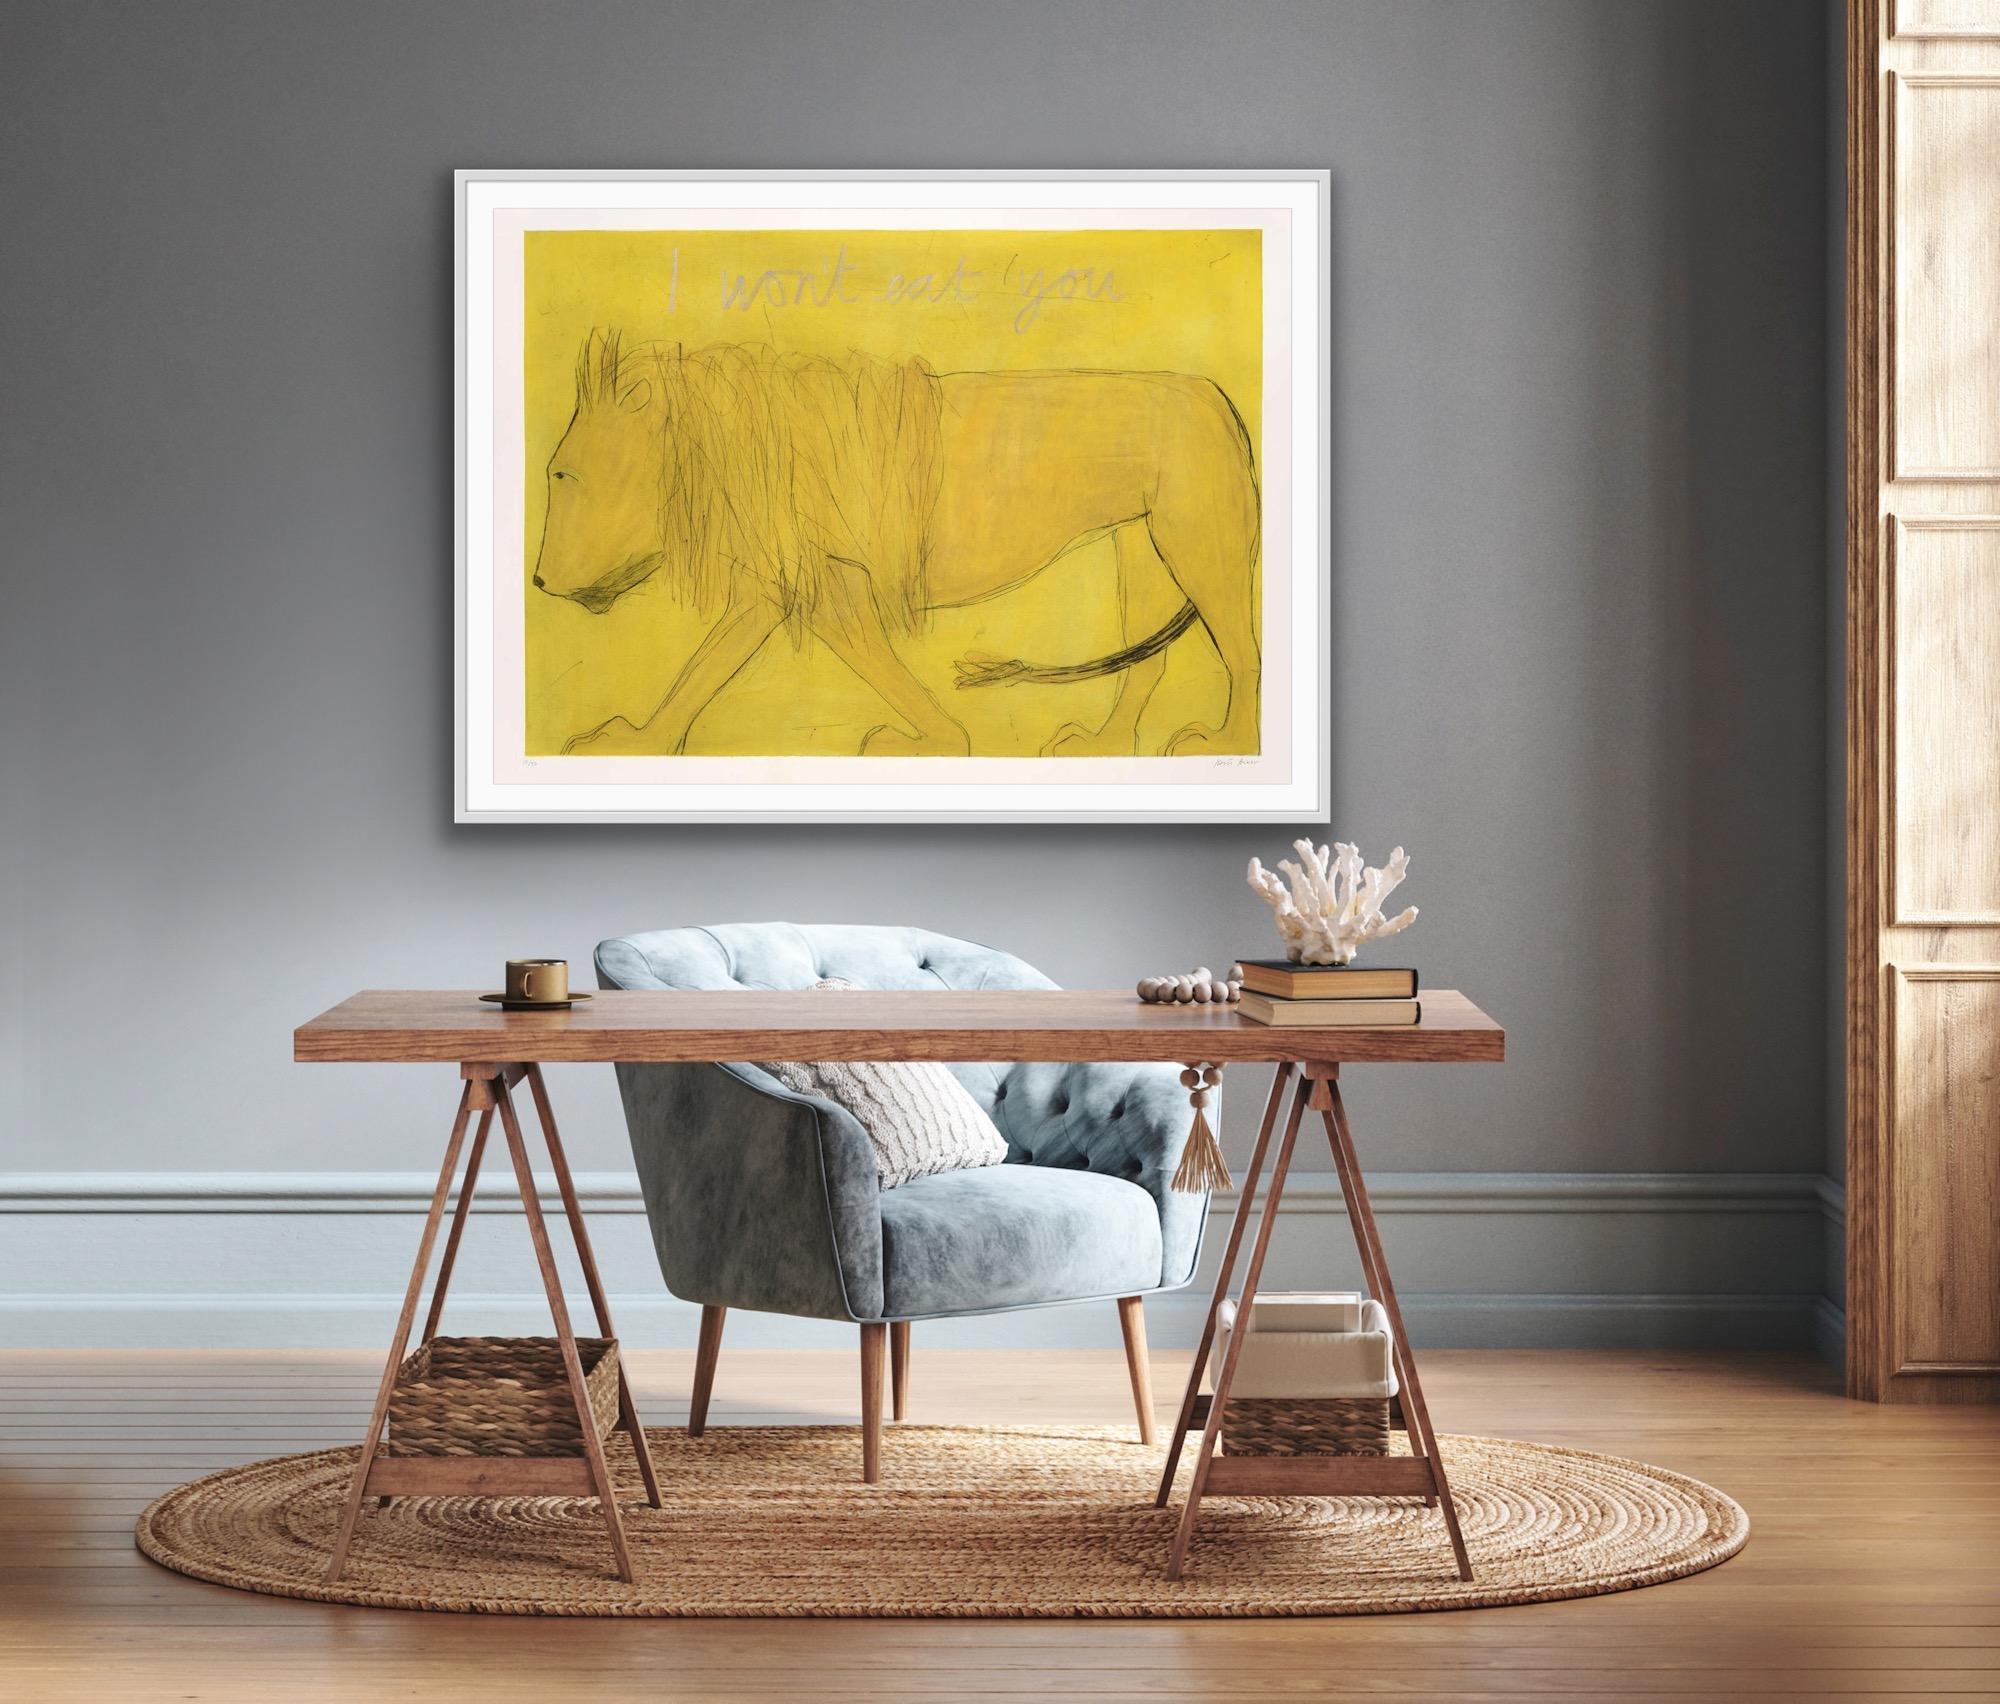 I Won't Eat You, Limited edition print, Animal print, Lion, Yellow, Illustrative For Sale 3